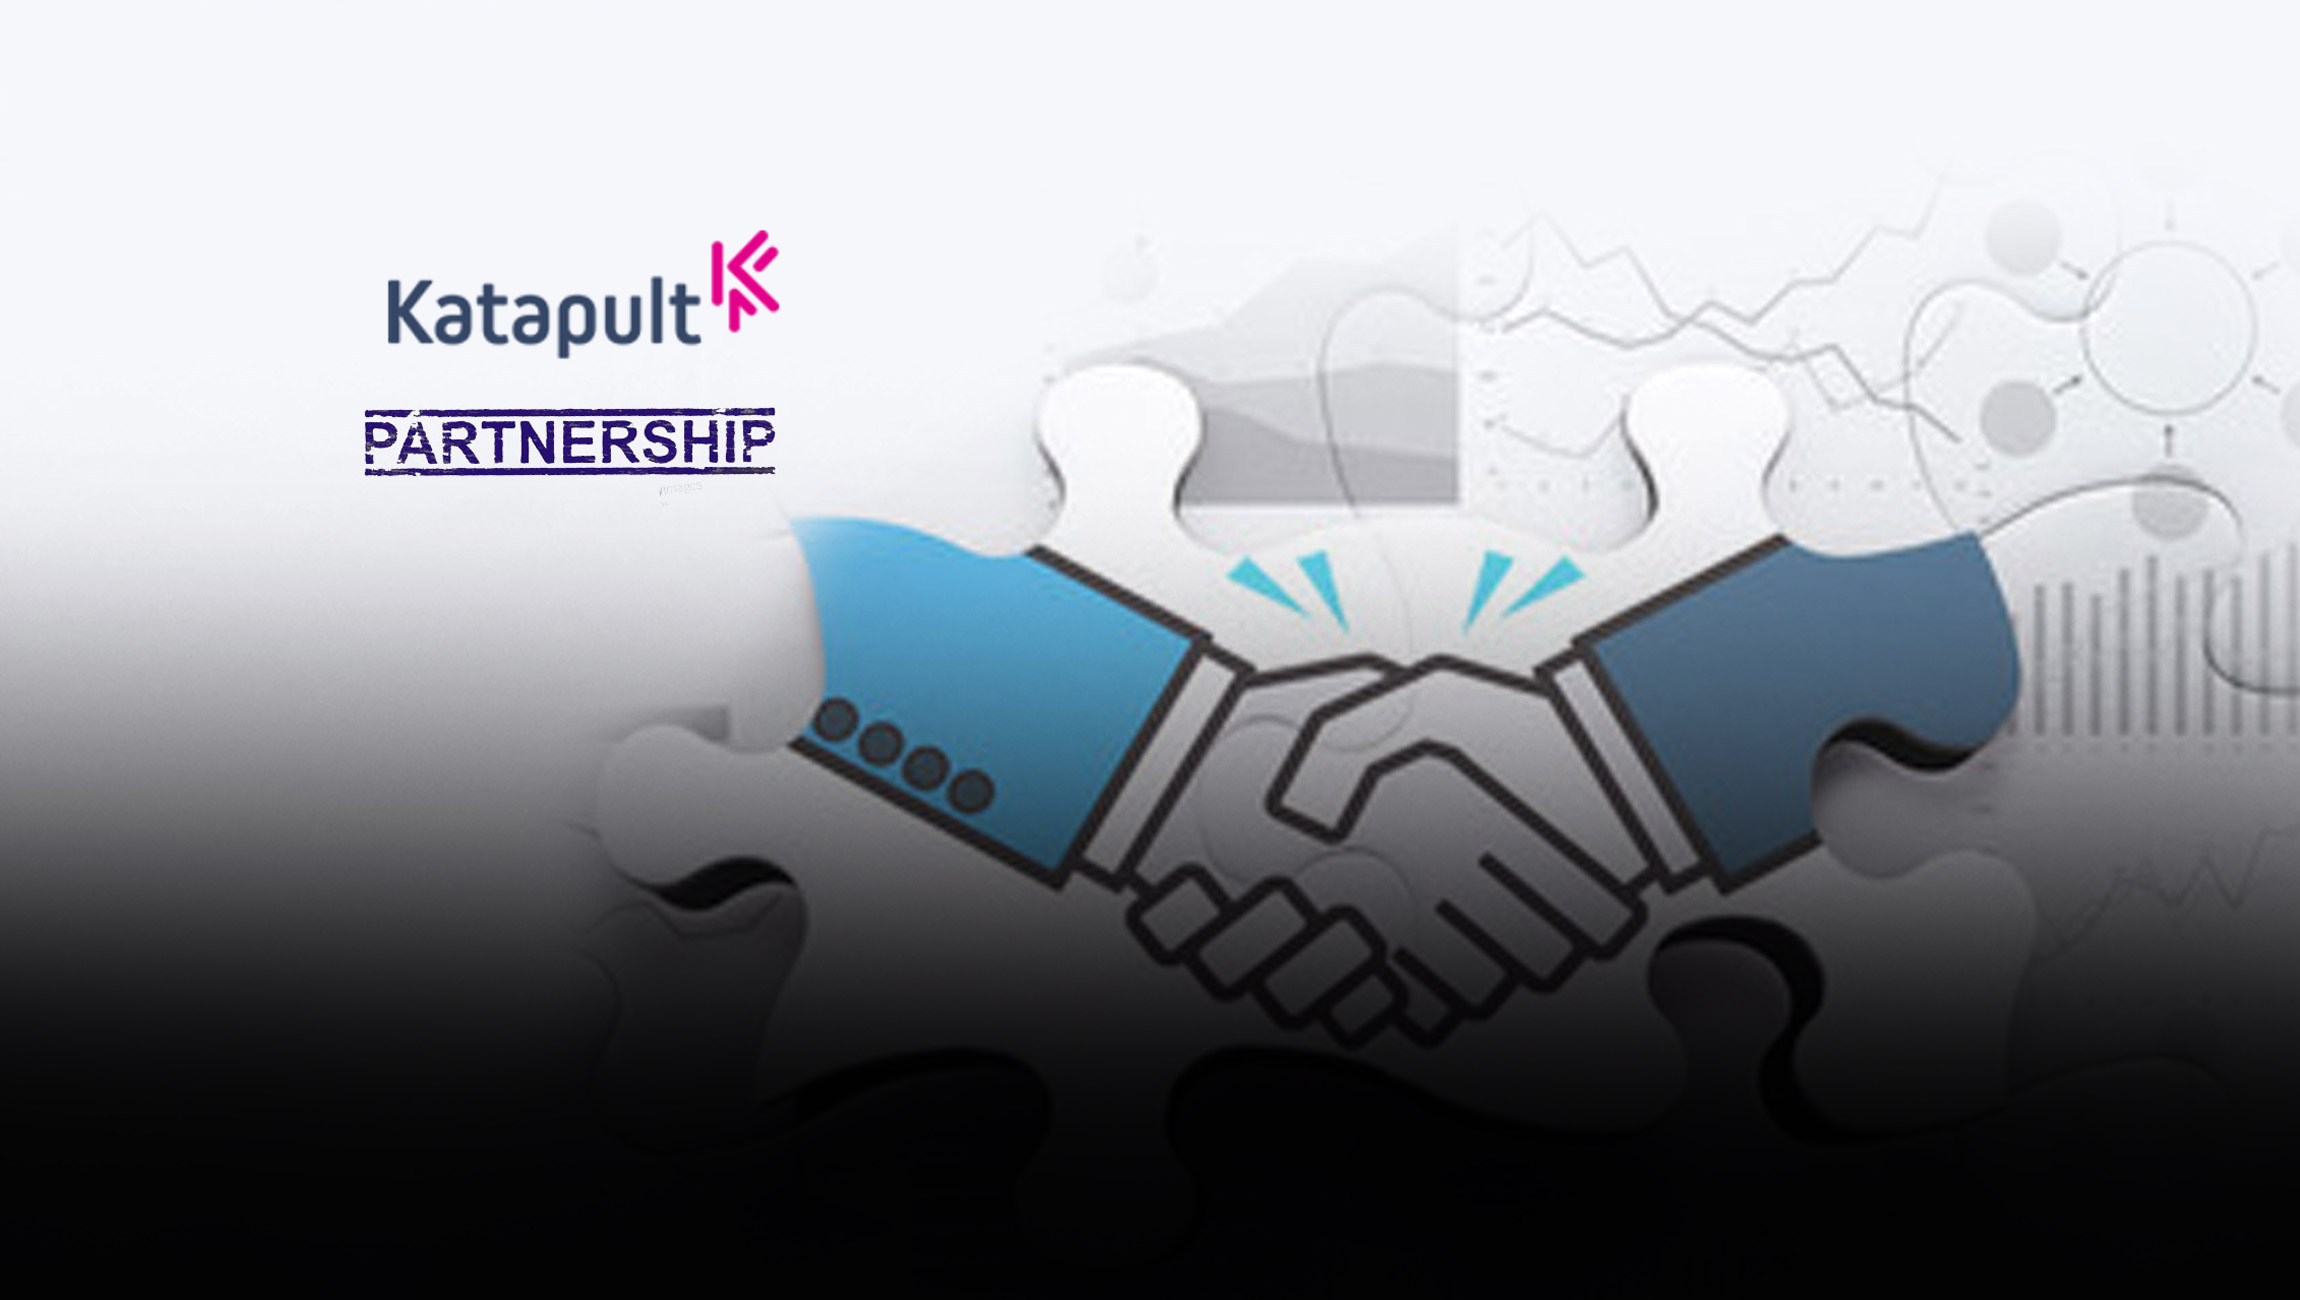 Katapult Partners With Mobile Device Retailer Wing